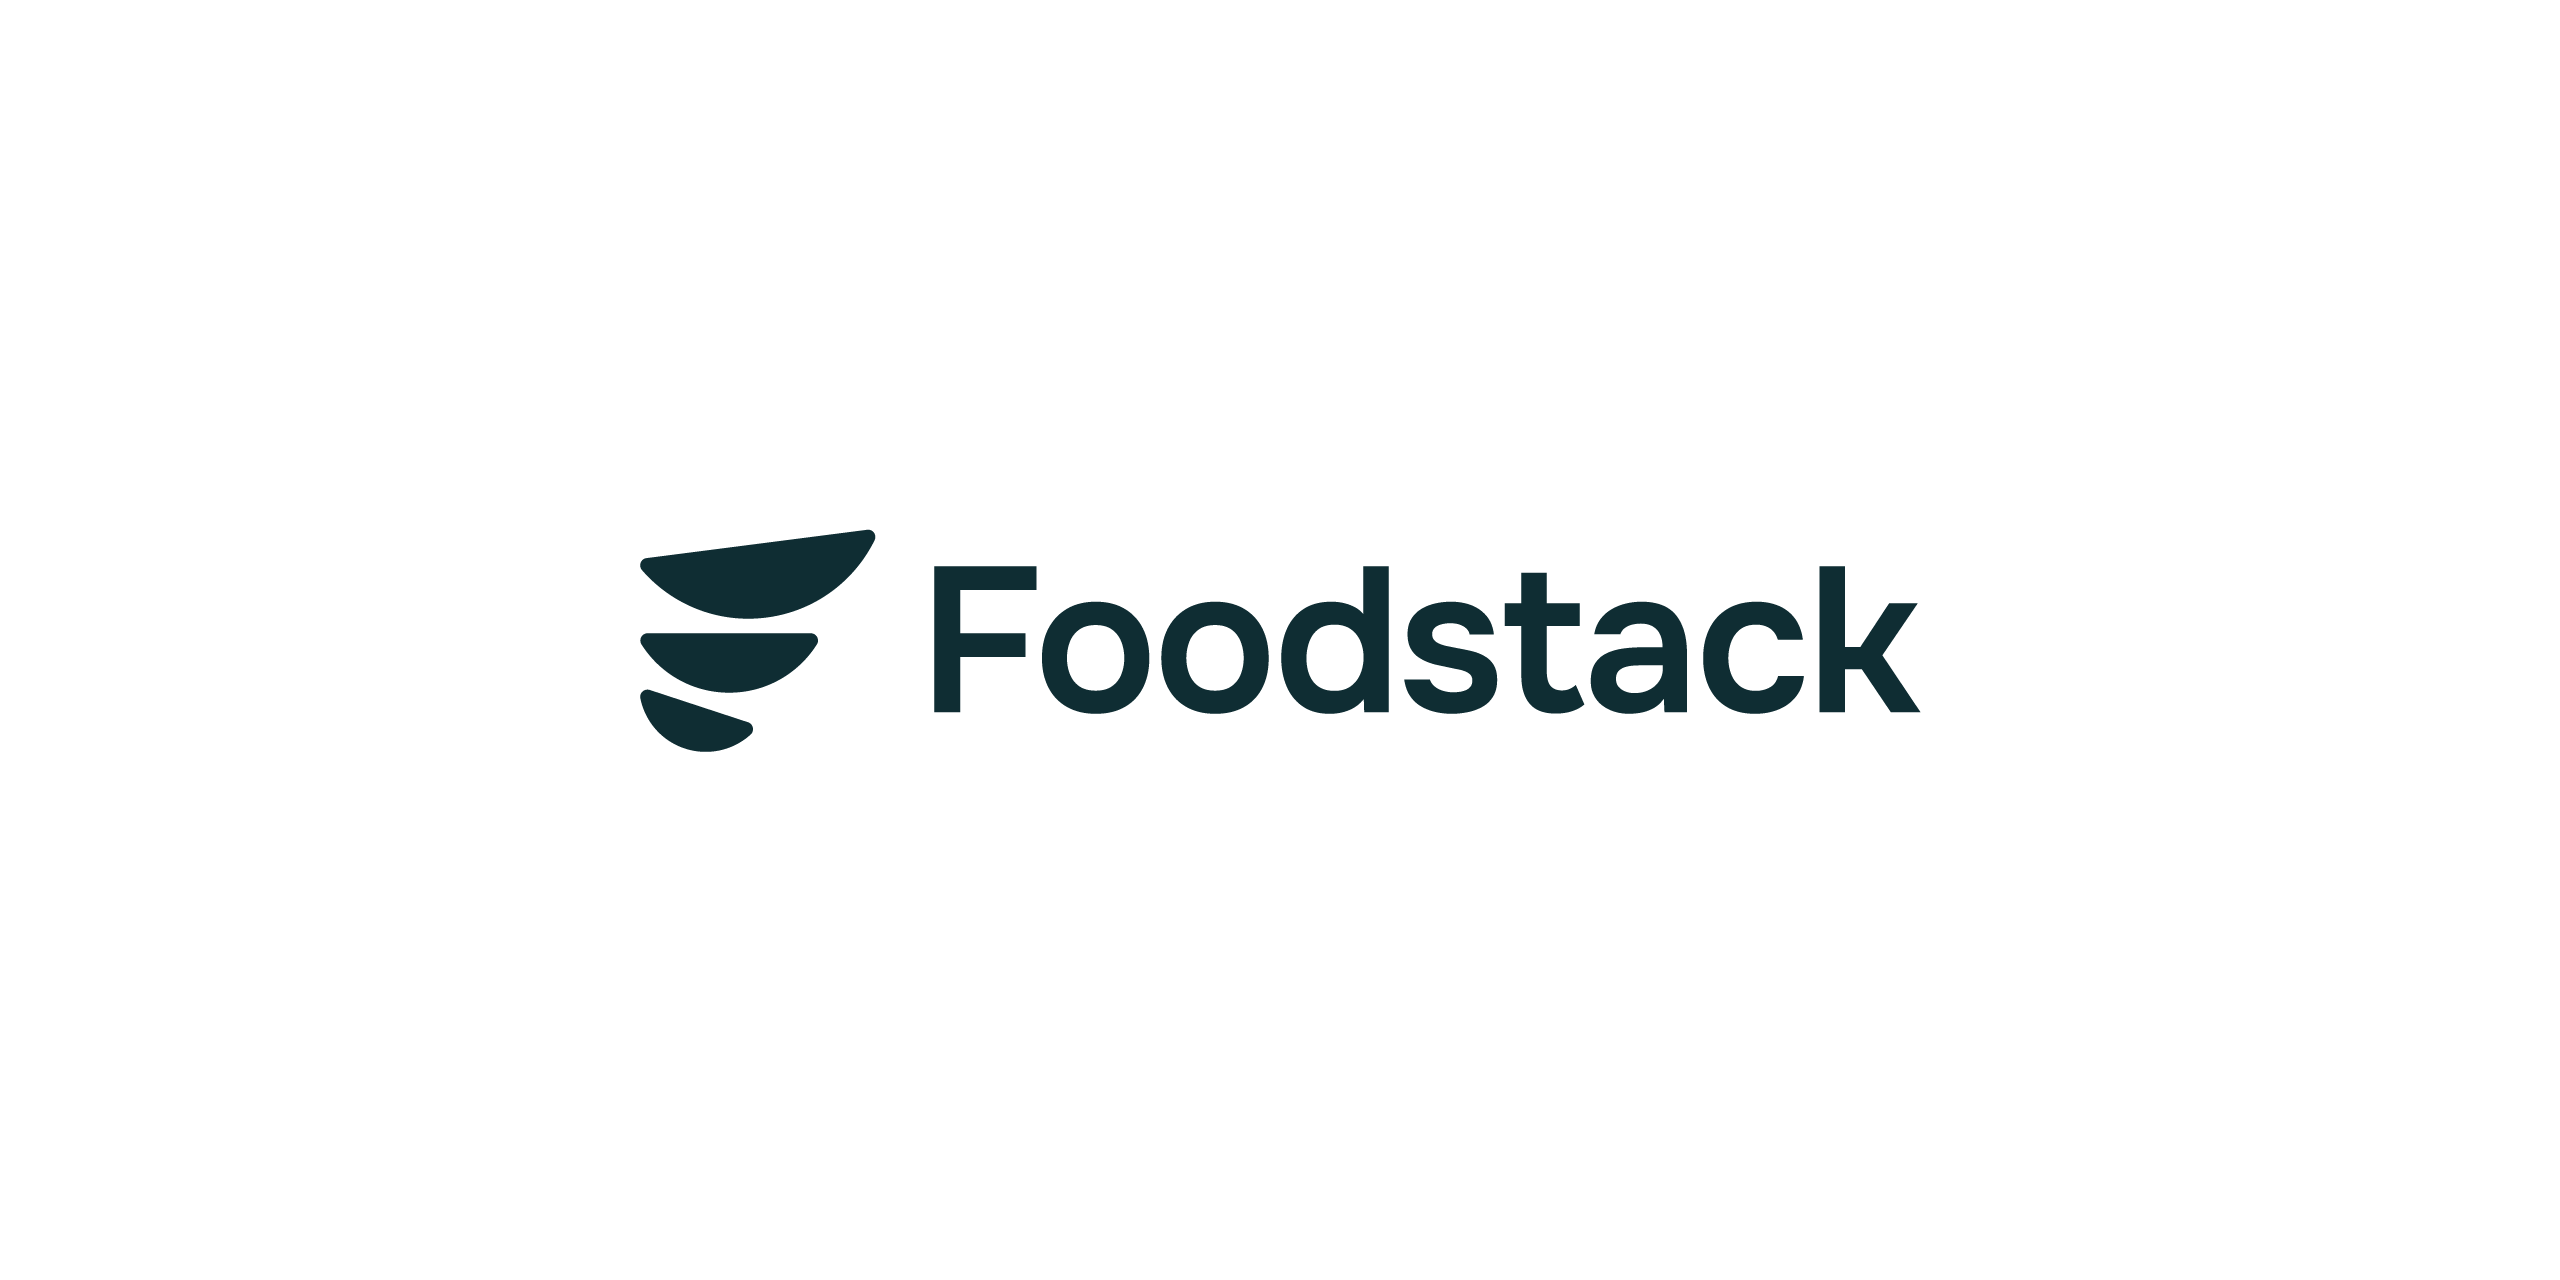 Foodstack logo in black, presenting a bold and strong visual for impactful branding.